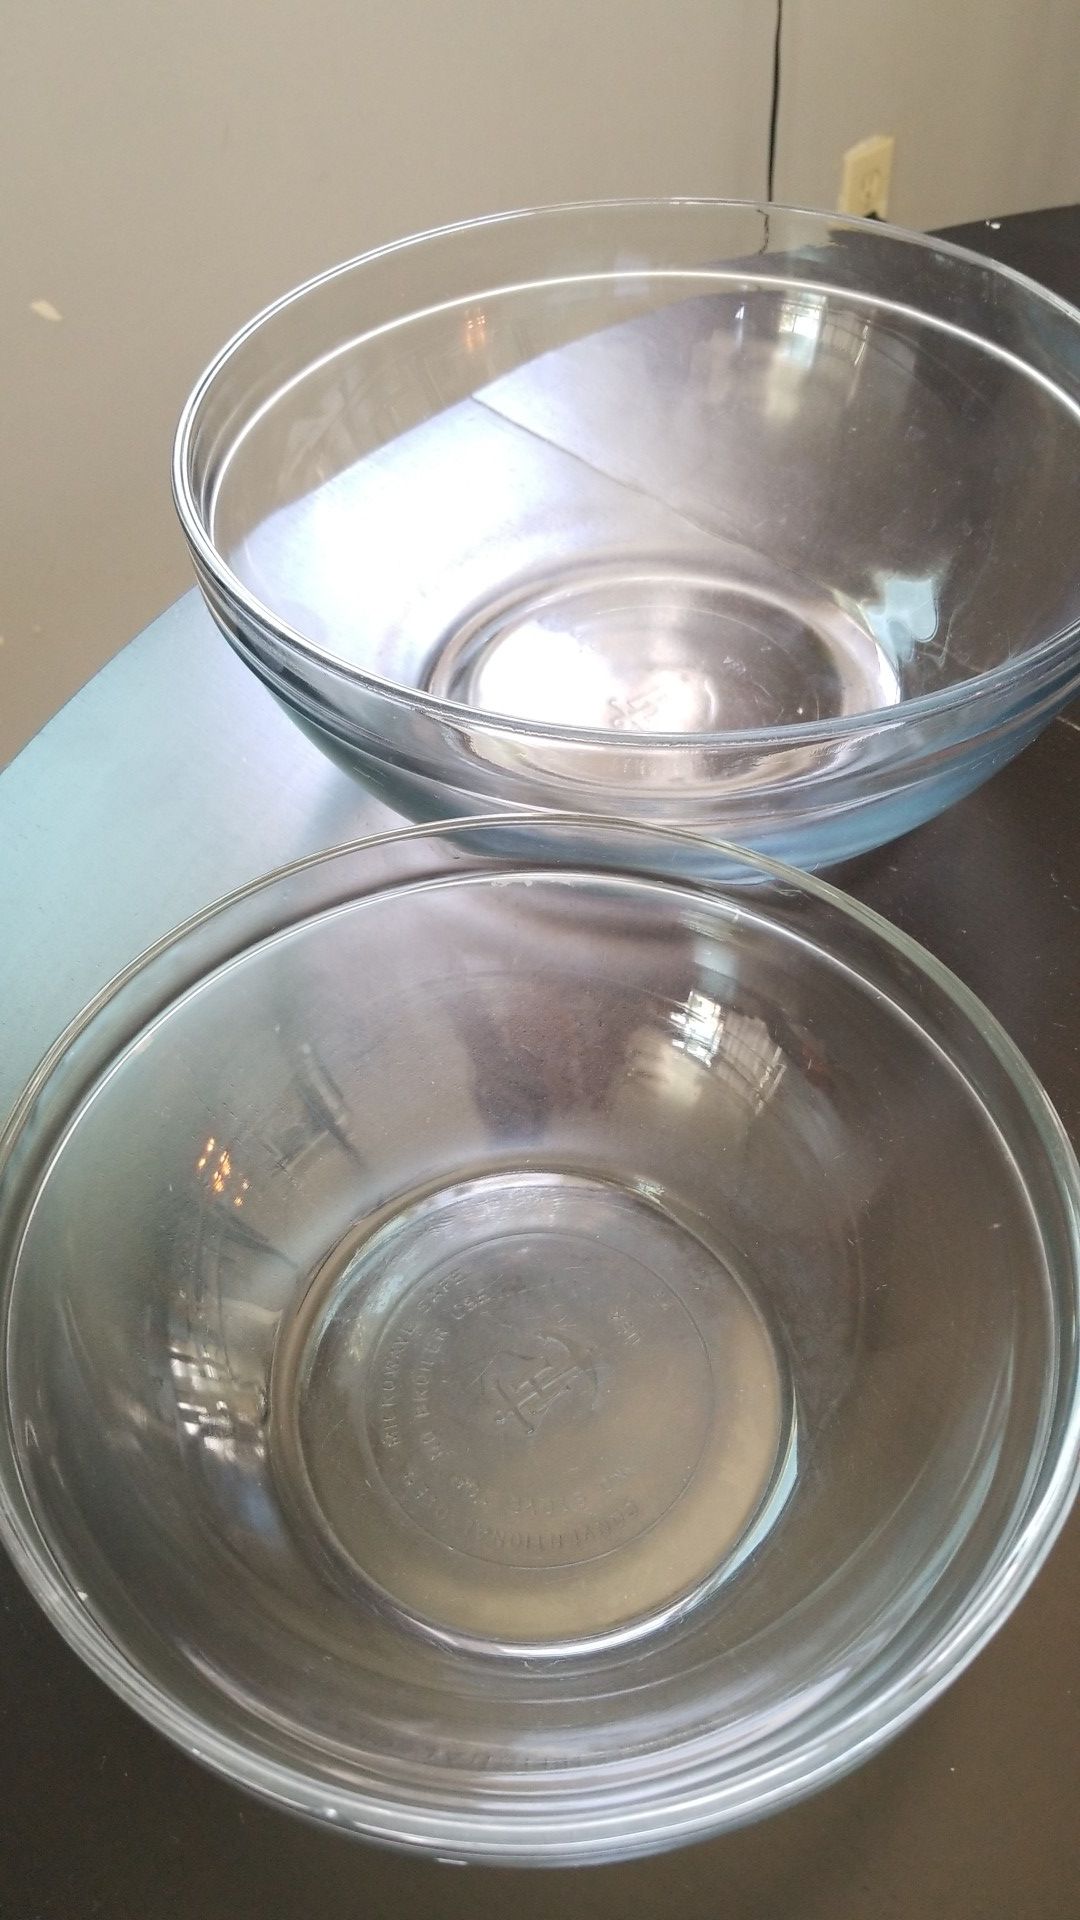 Set of 2 plain glass mixing bowls and glass stand